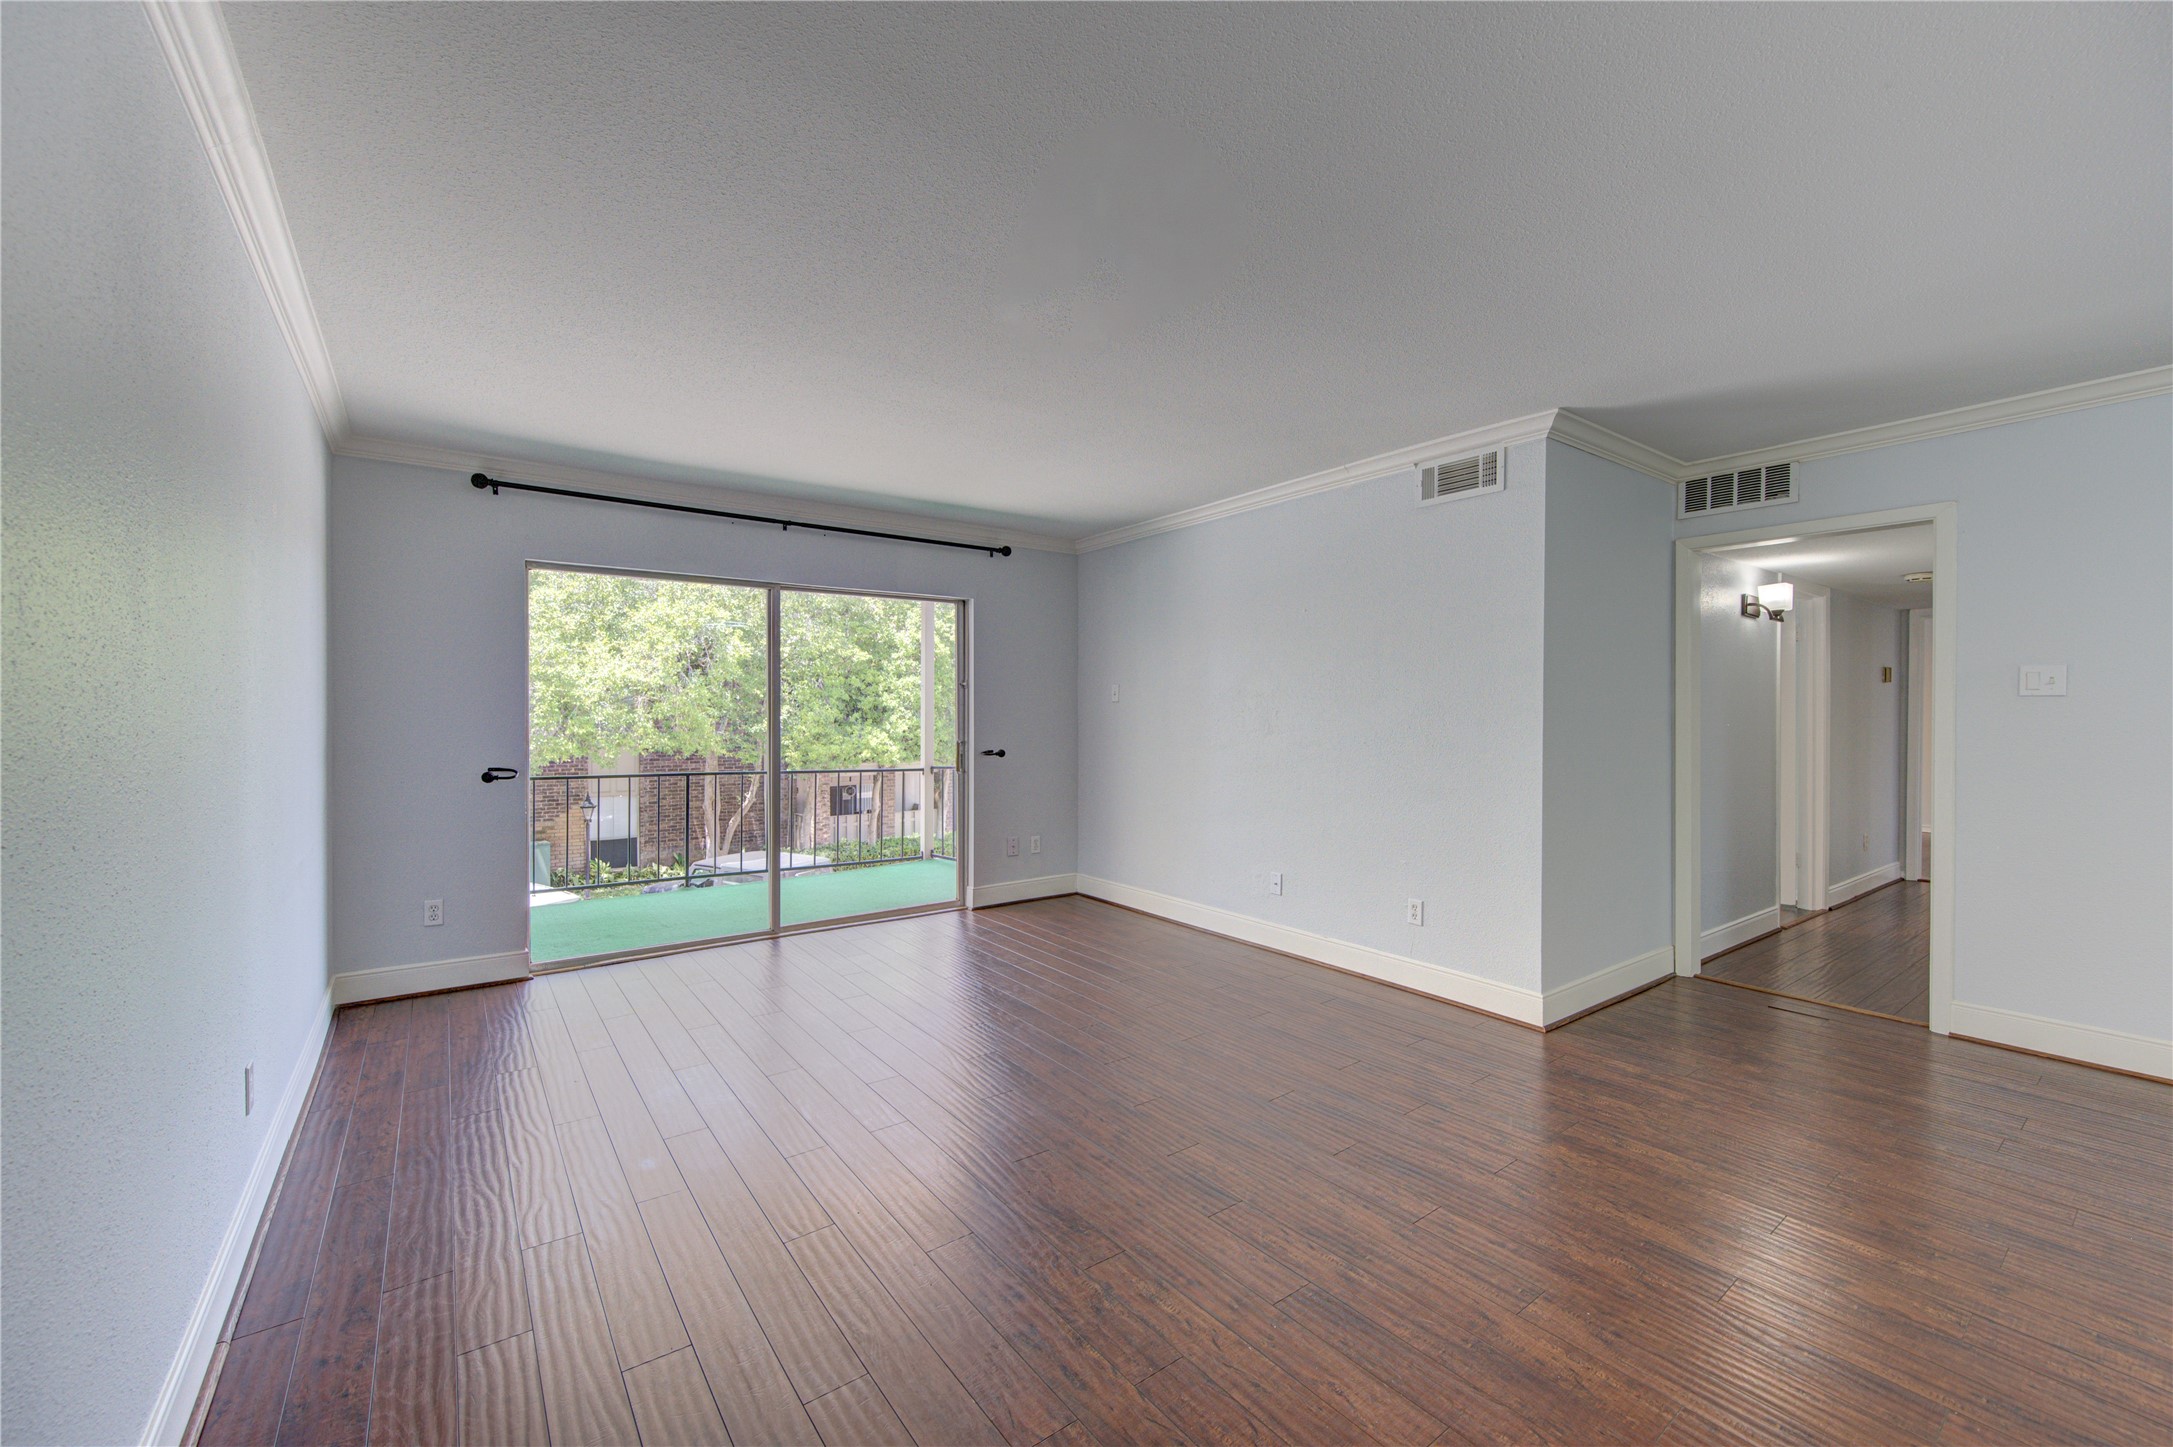 Walk down the hall to reach both bedrooms, laundry and bathrooms!